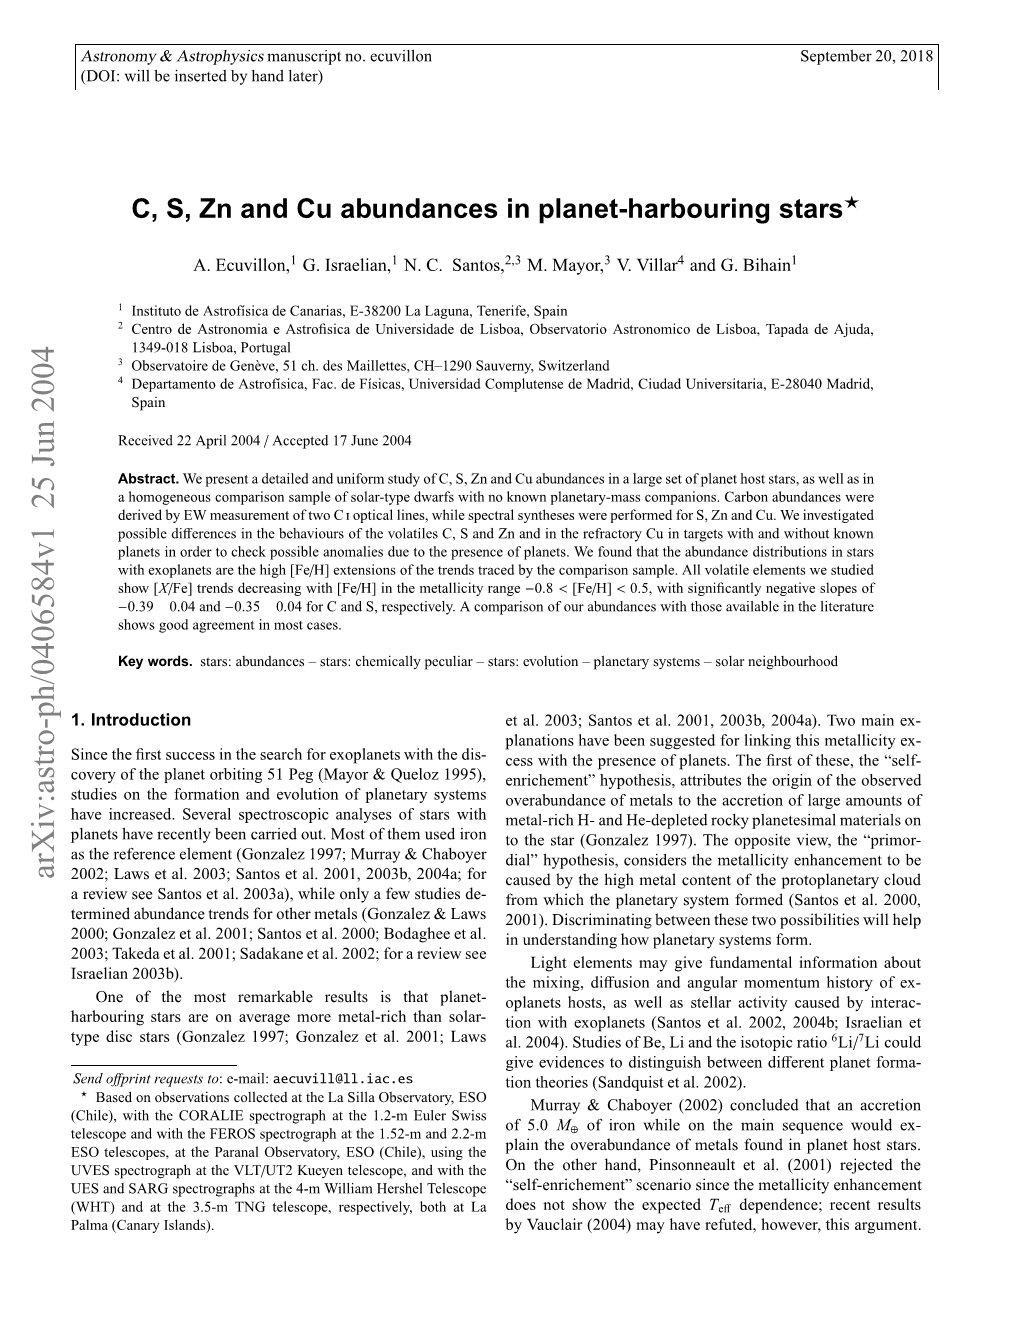 C, S, Zn and Cu Abundances in Planet-Harbouring Stars